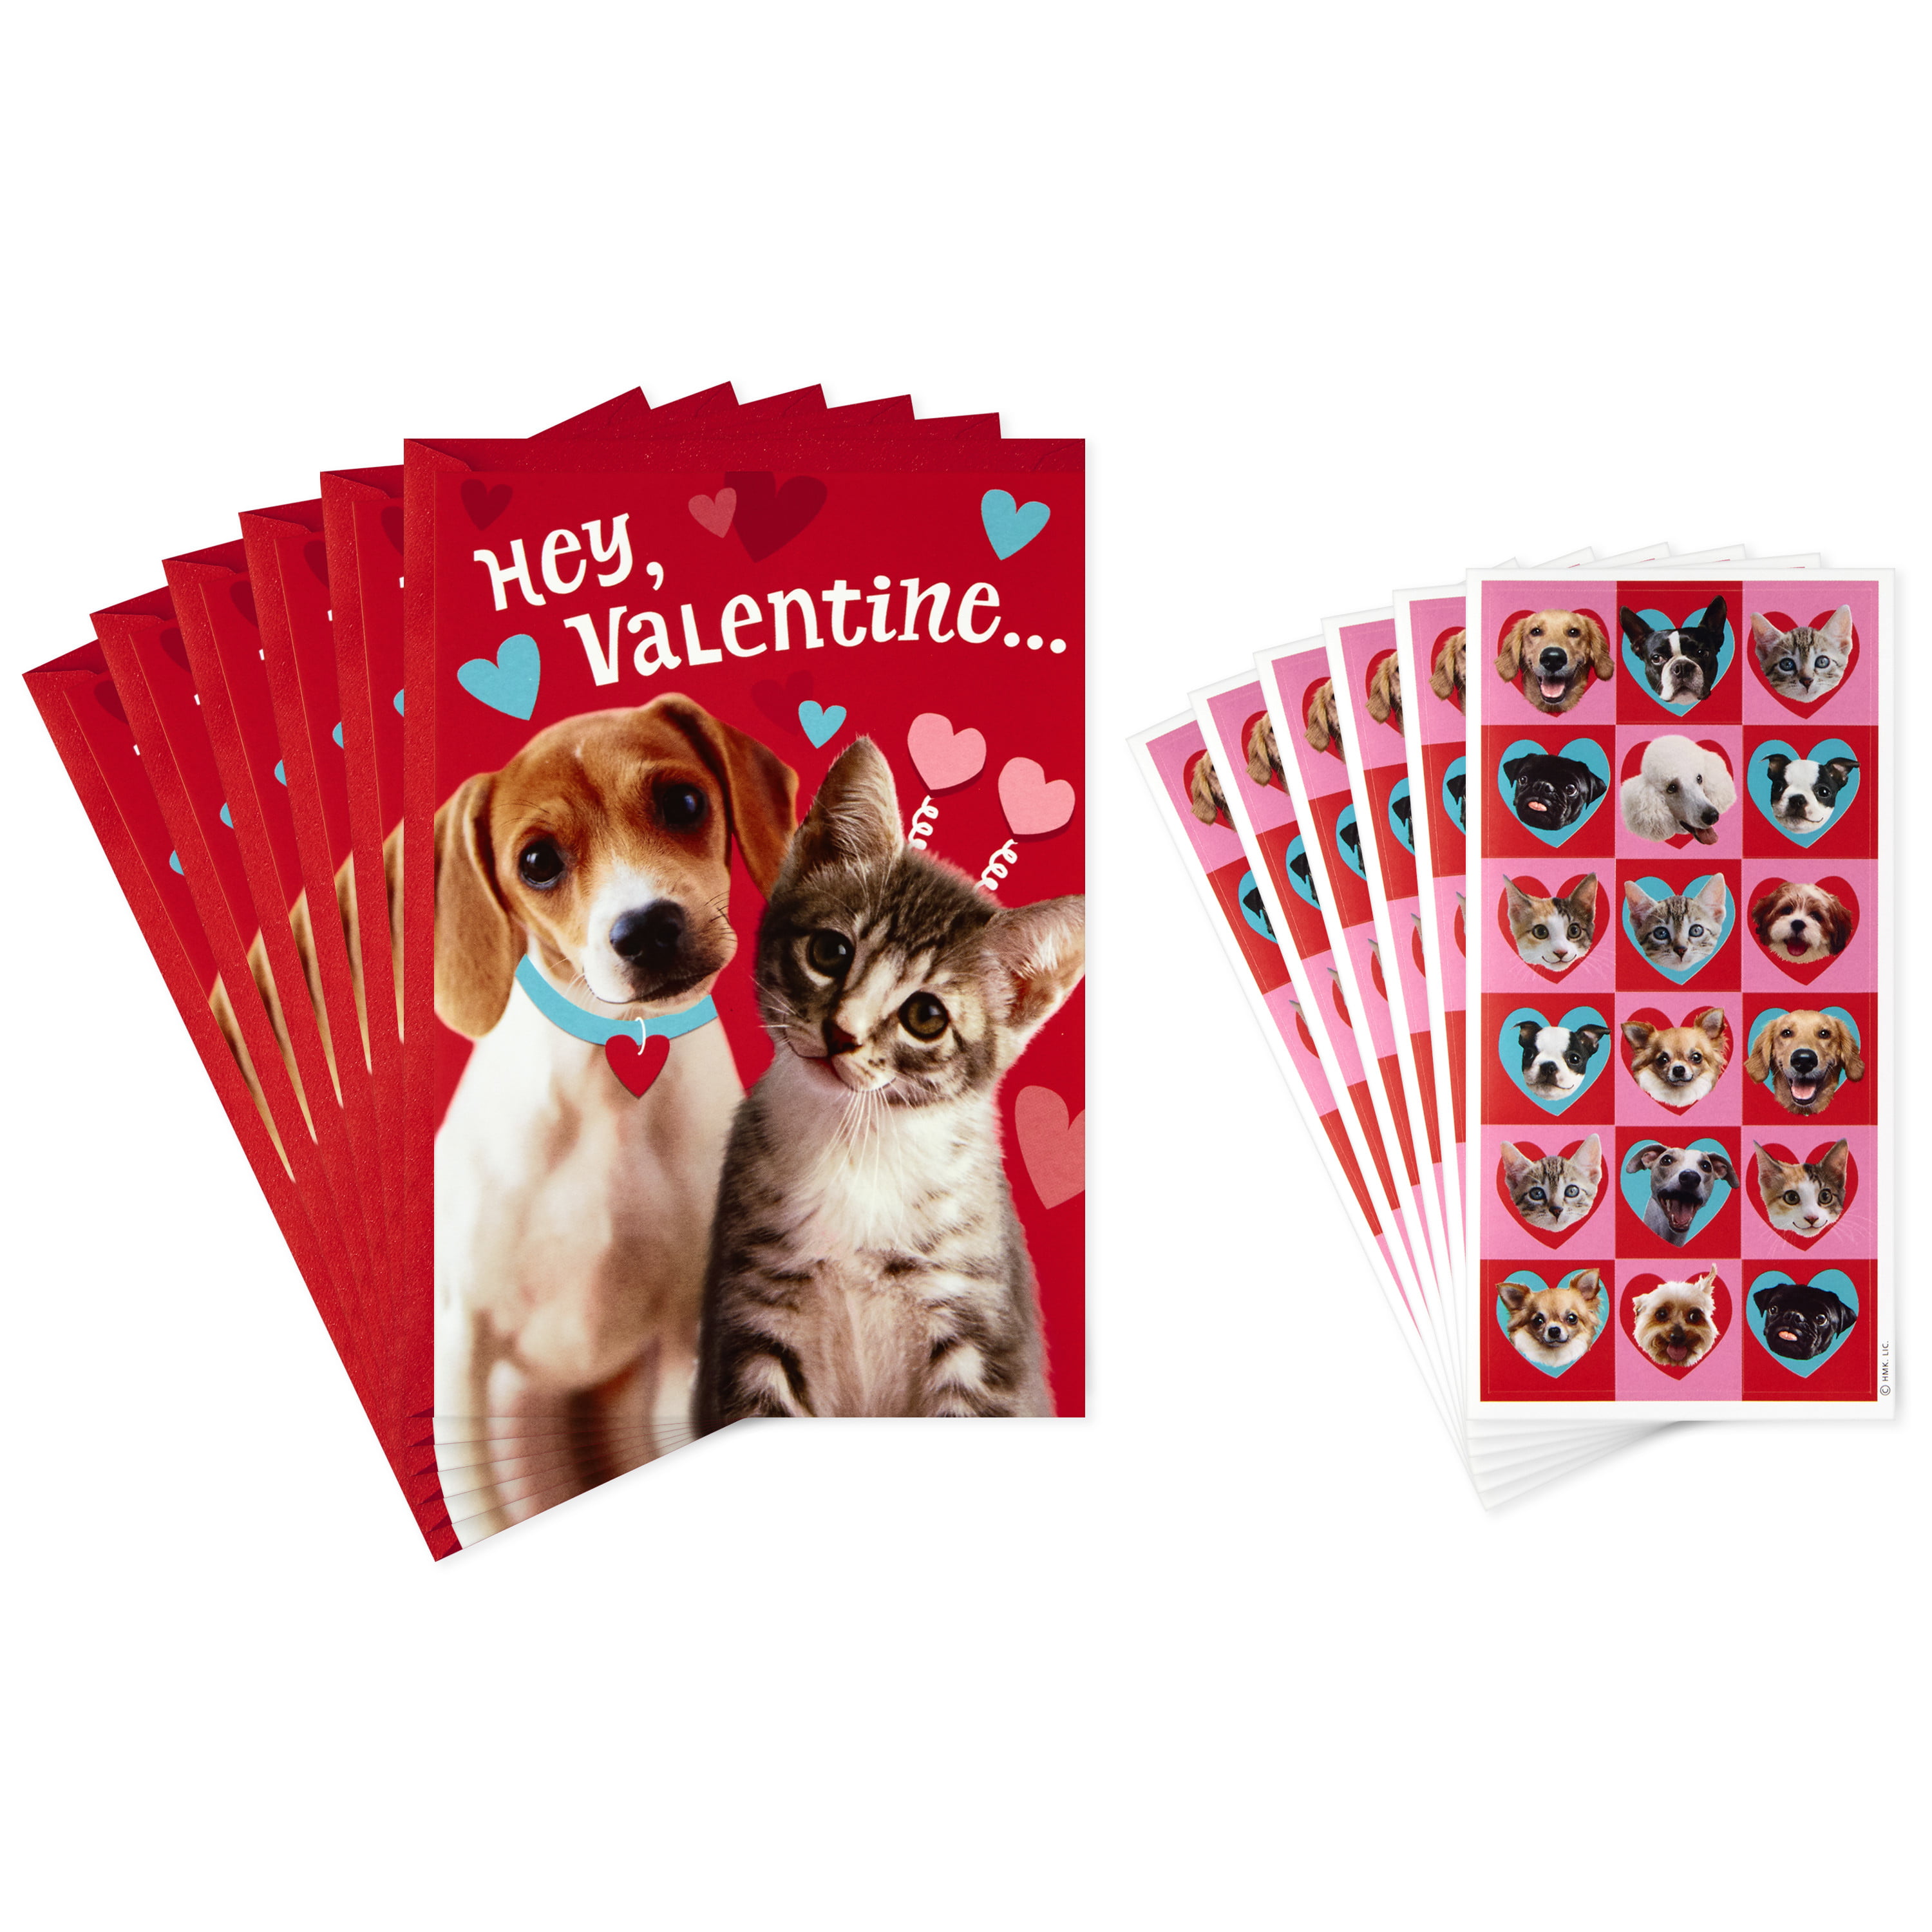 Dog with Heart Hallmark Pack of Valentines Day Cards 6 Valentines Day Cards with Envelopes 